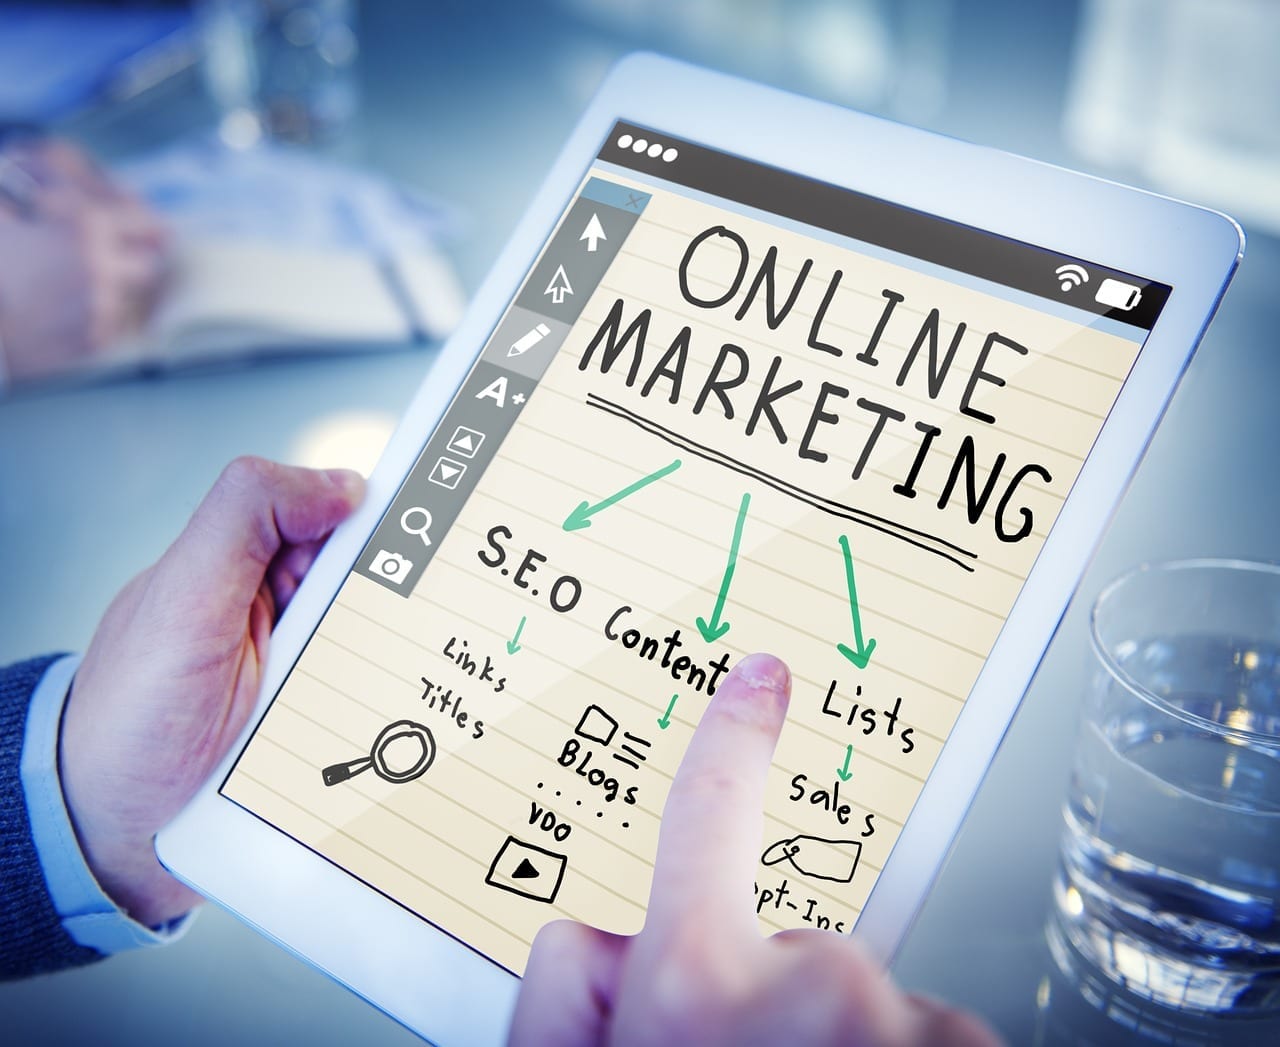 Digital Marketing Advice for Small Businesses